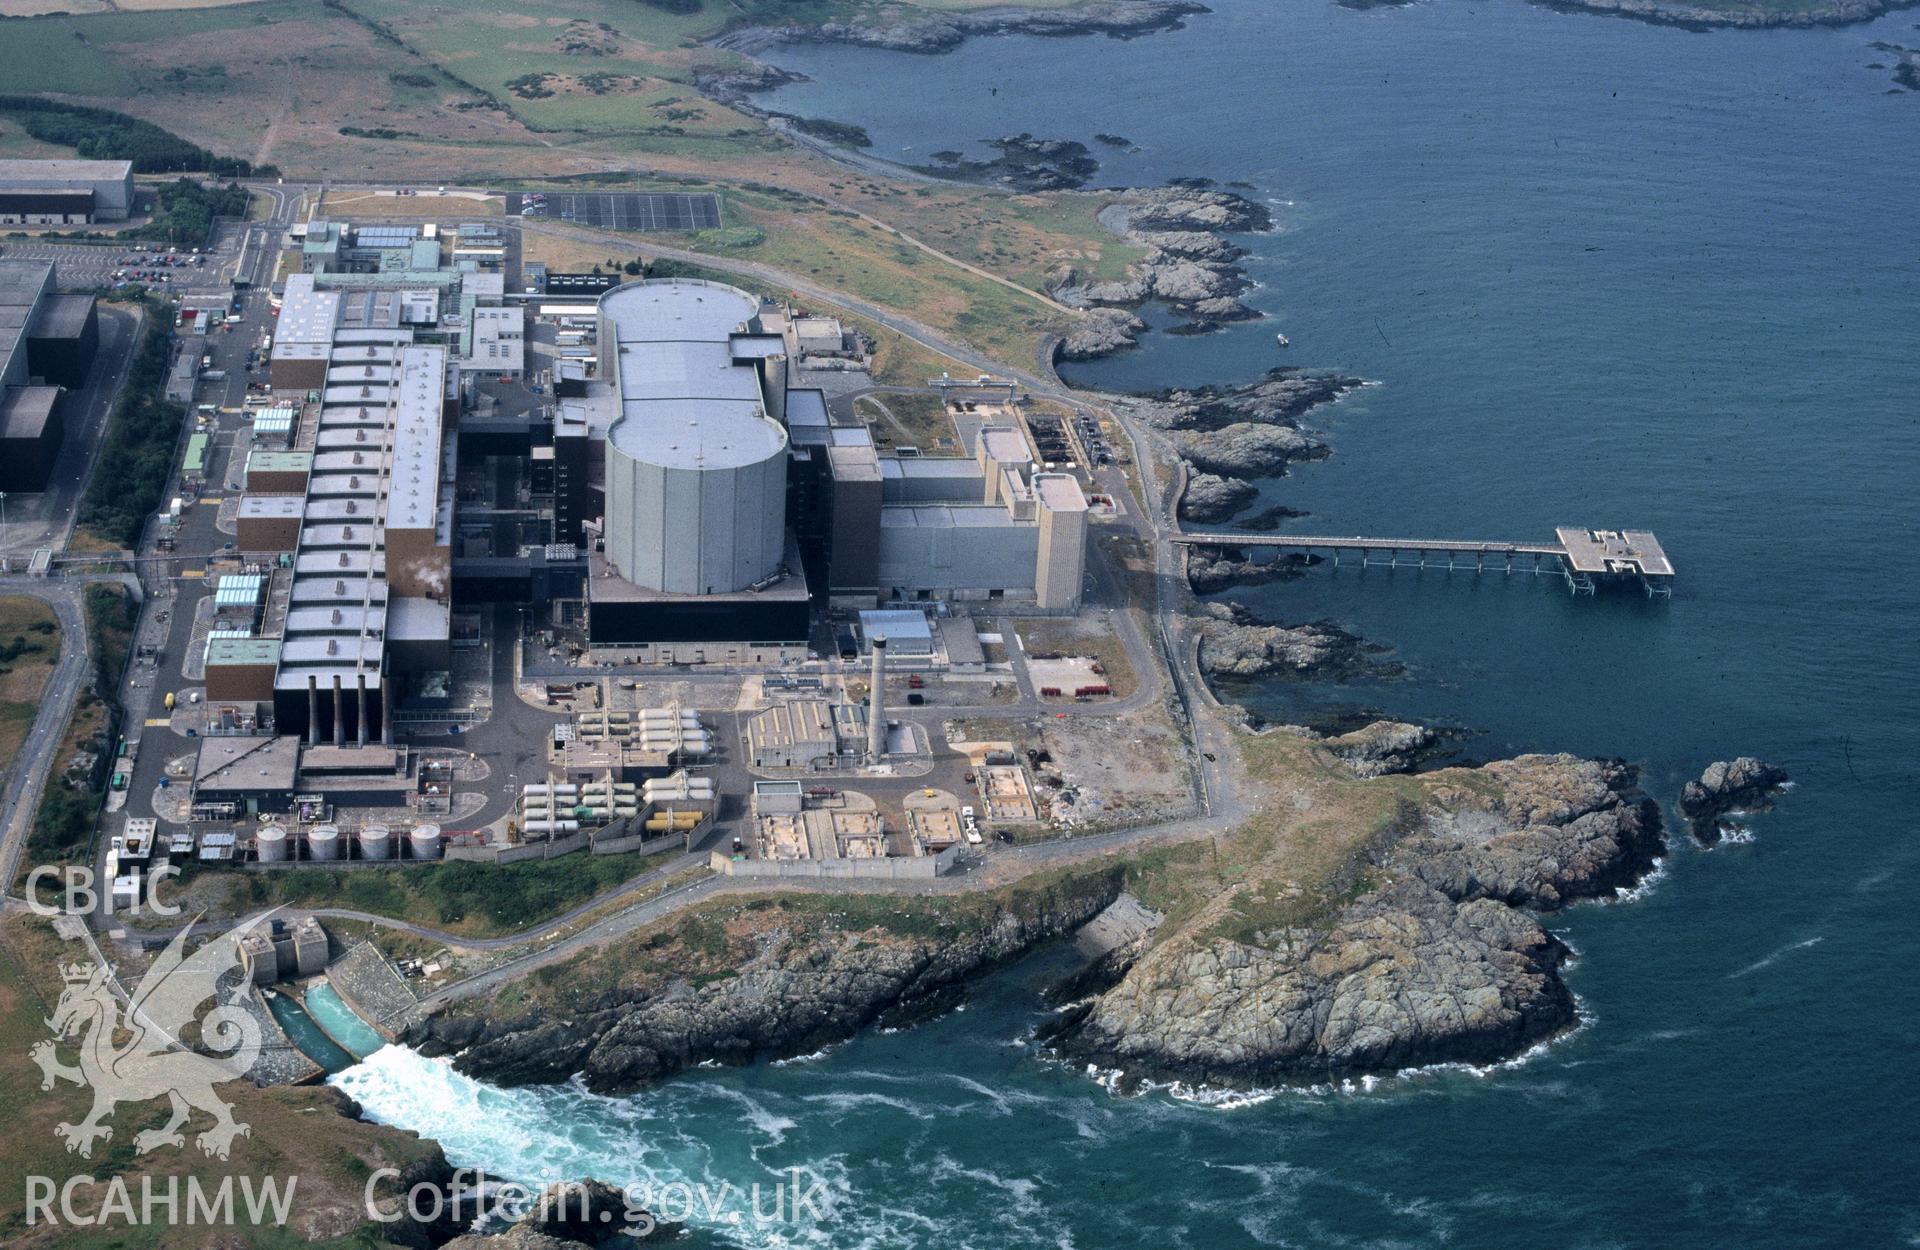 Slide of RCAHMW colour oblique aerial photograph of Wylfa Nuclear Power Station, taken by C.R. Musson, 9/7/1995.